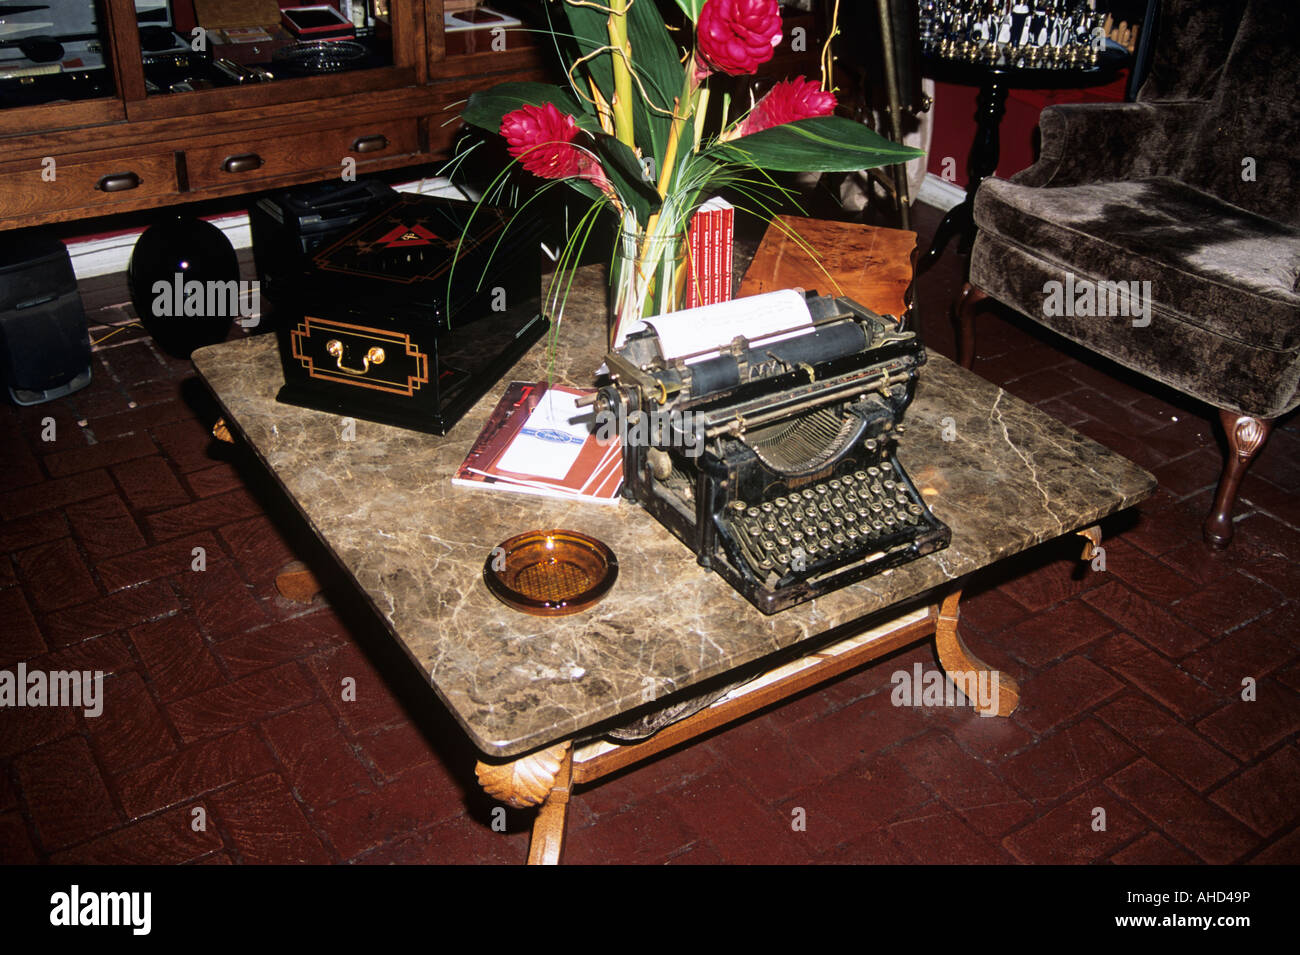 Antique typewriter on display in an antique shop, French Quarter, New Orleans, Louisiana, USA Stock Photo